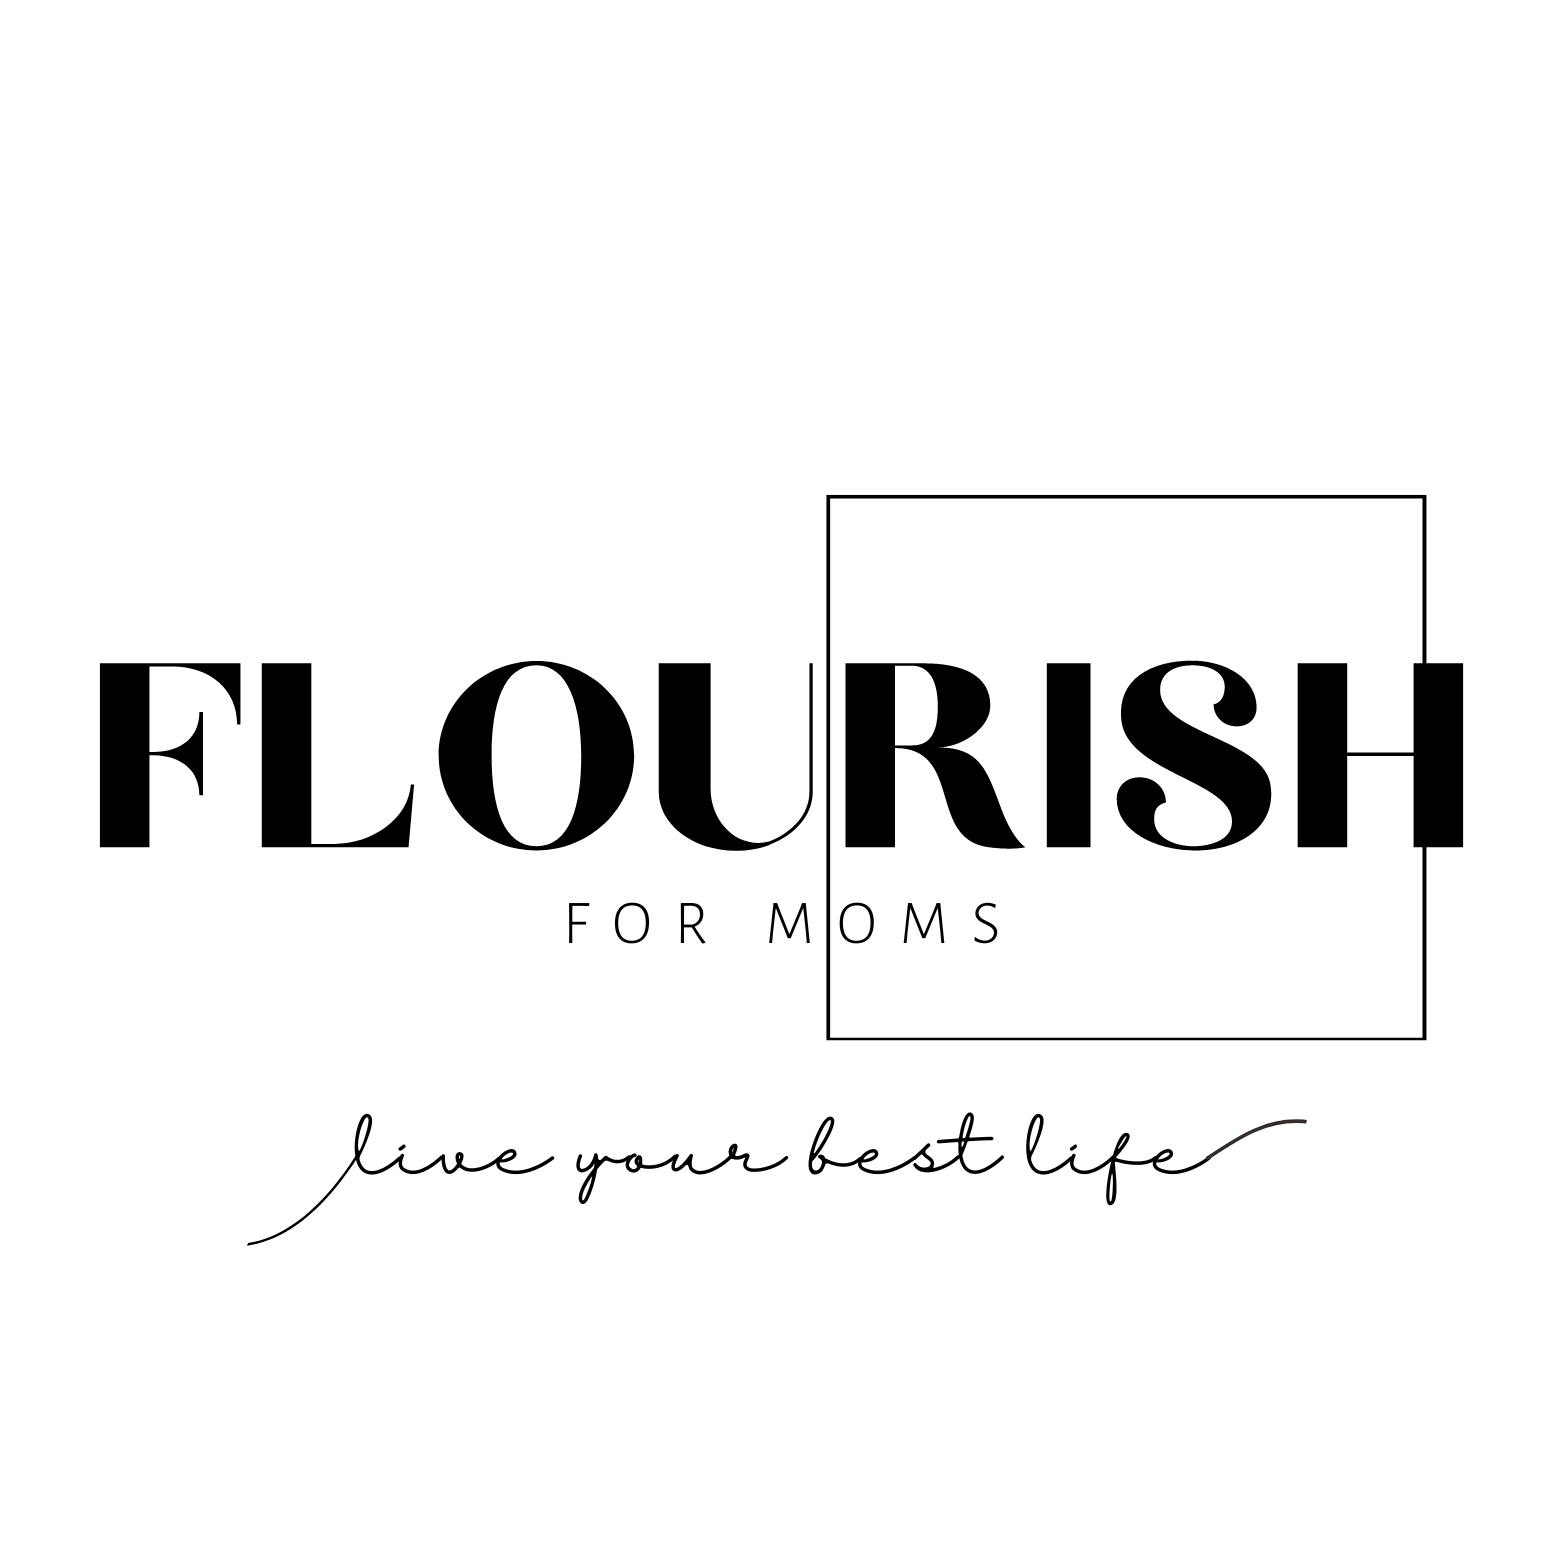 Welcome to Flourish For Moms!